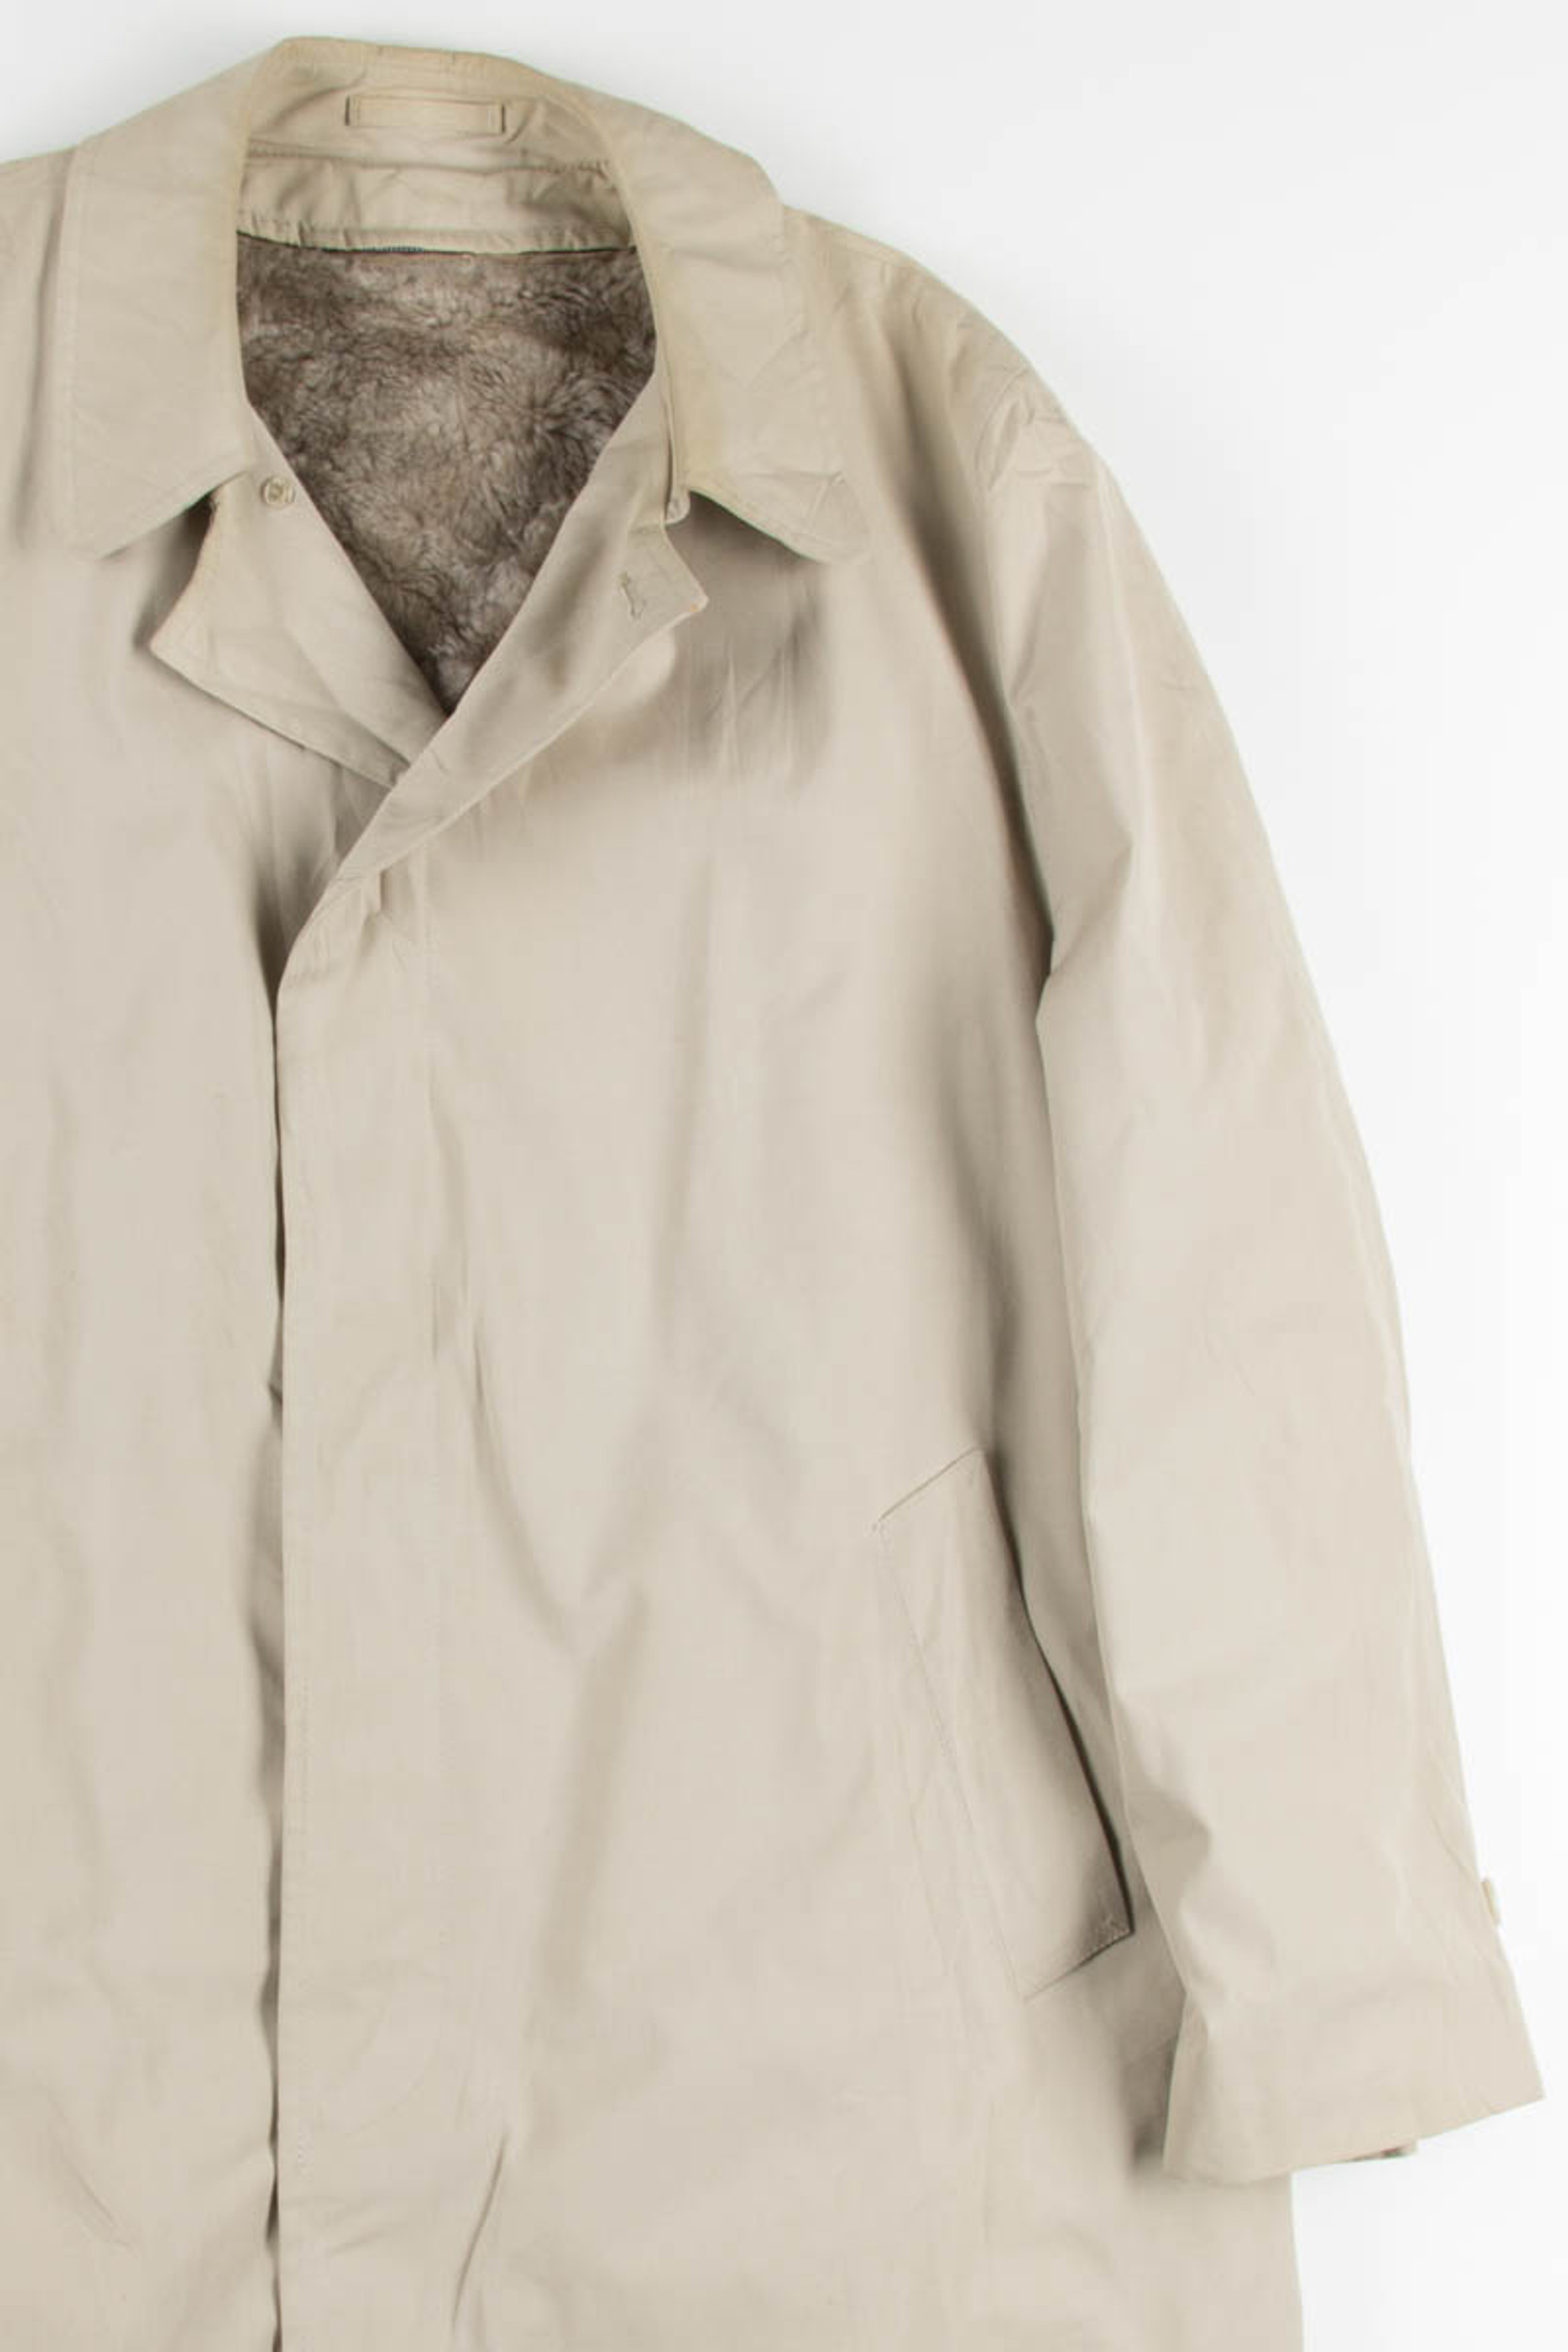 Recycled + Vintage Clothing - Vintage Trench Coats - Ragstock.com